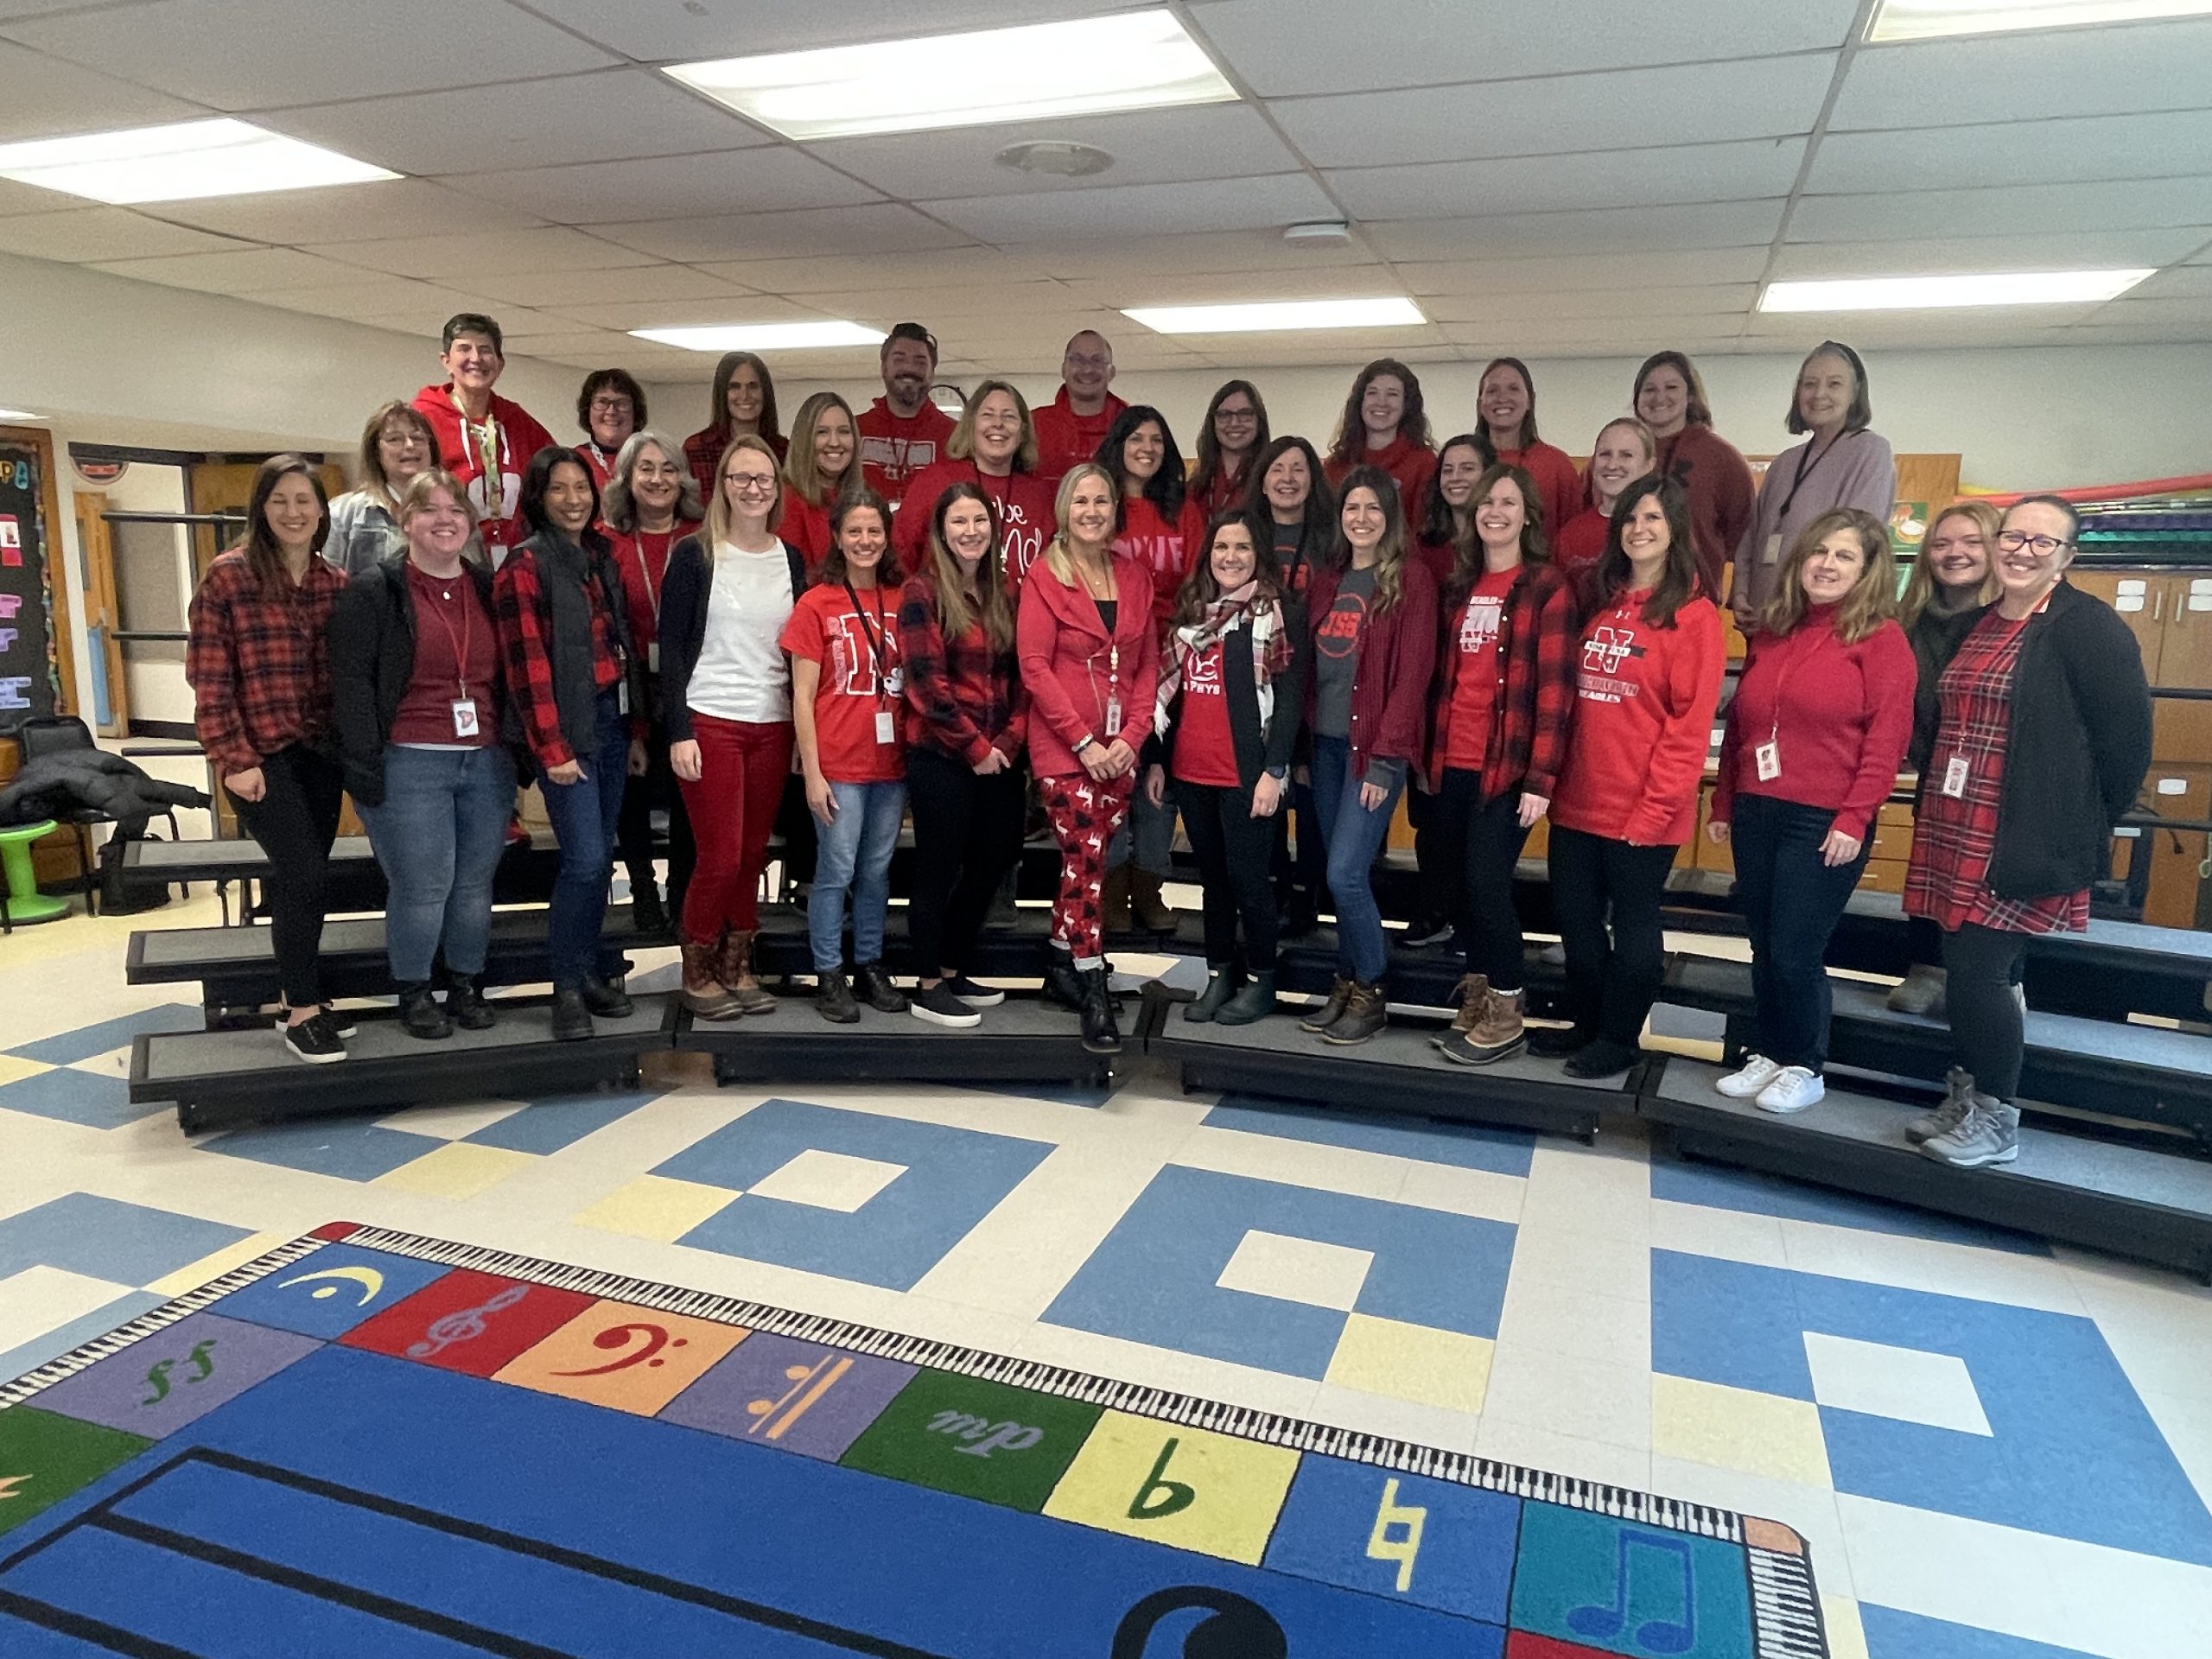 Birchwood Elementary School faculty and staff wear red and gather for a photo in support of 4th grader Jack Salinetti, who is fighting leukemia.